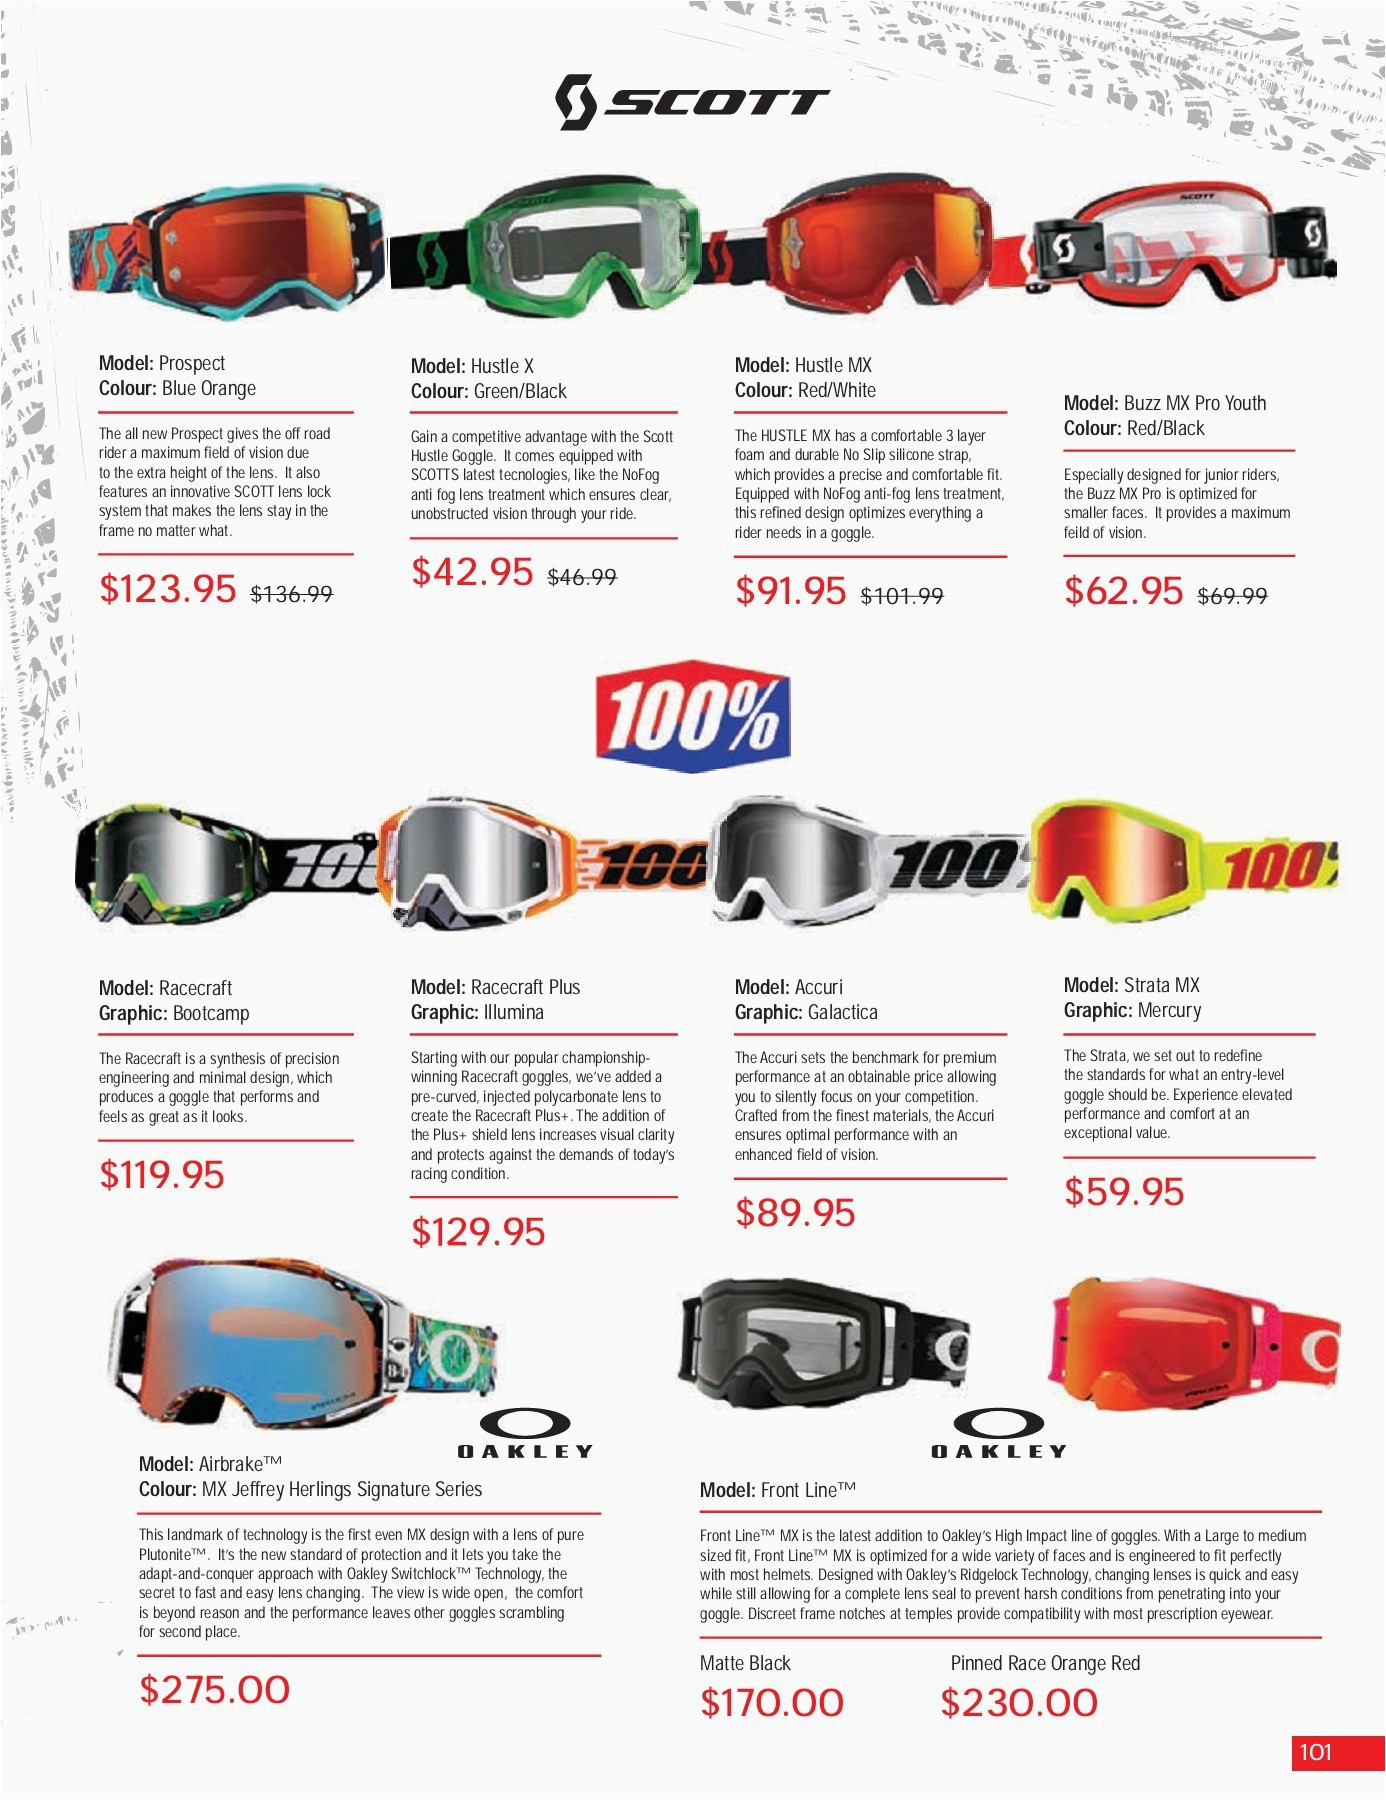 Rugged Blue Diablo Safety Glasses 2019 Gp Bikes Catalogue Pages 101 150 Text Version